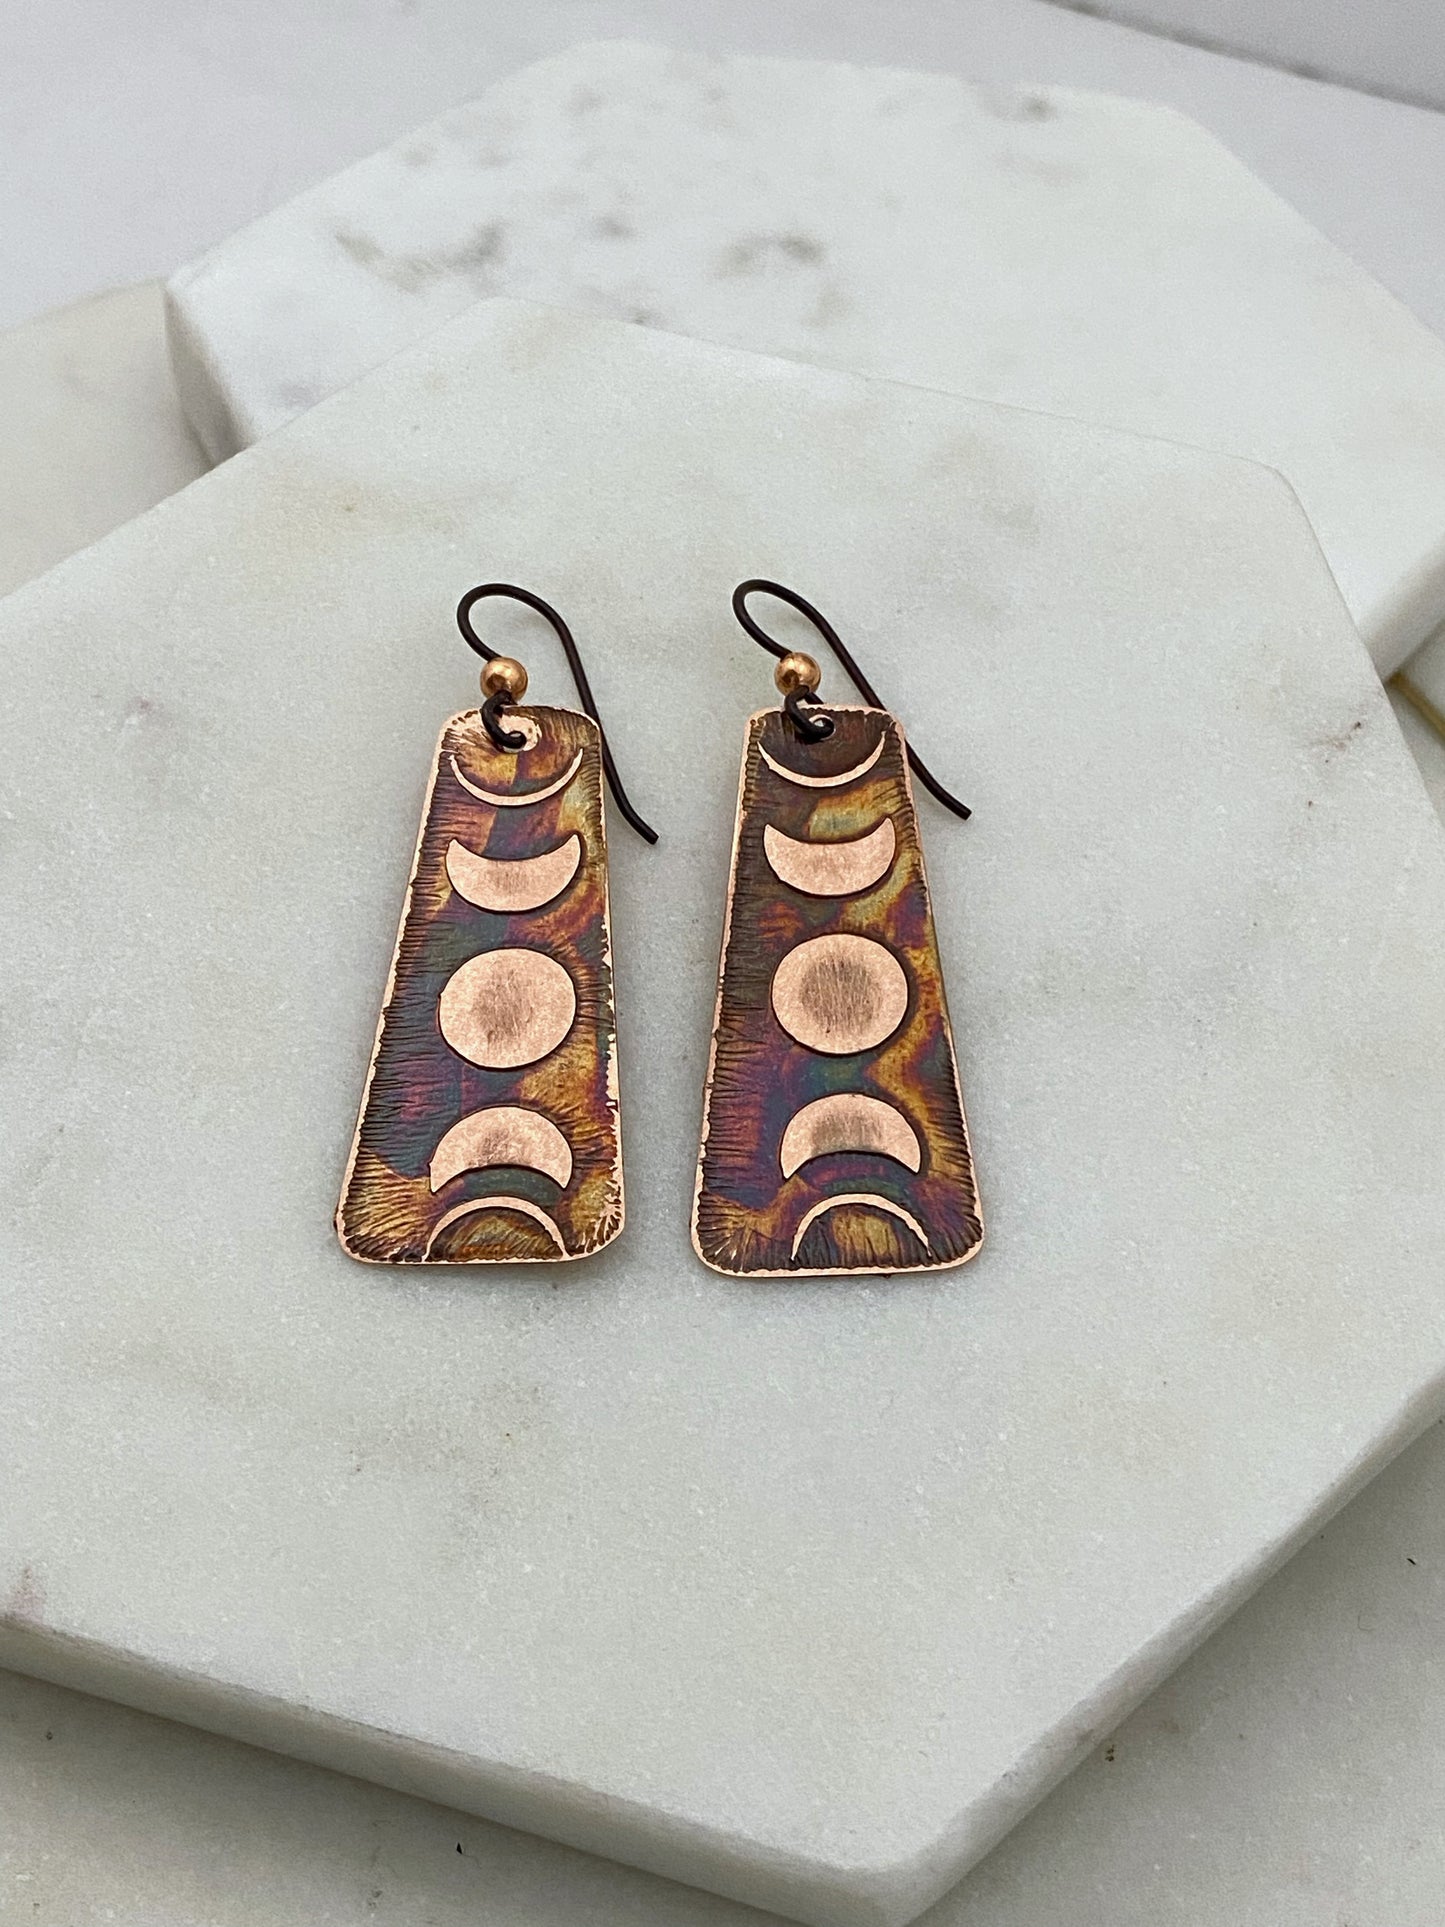 Acid etched copper moon phase earrings